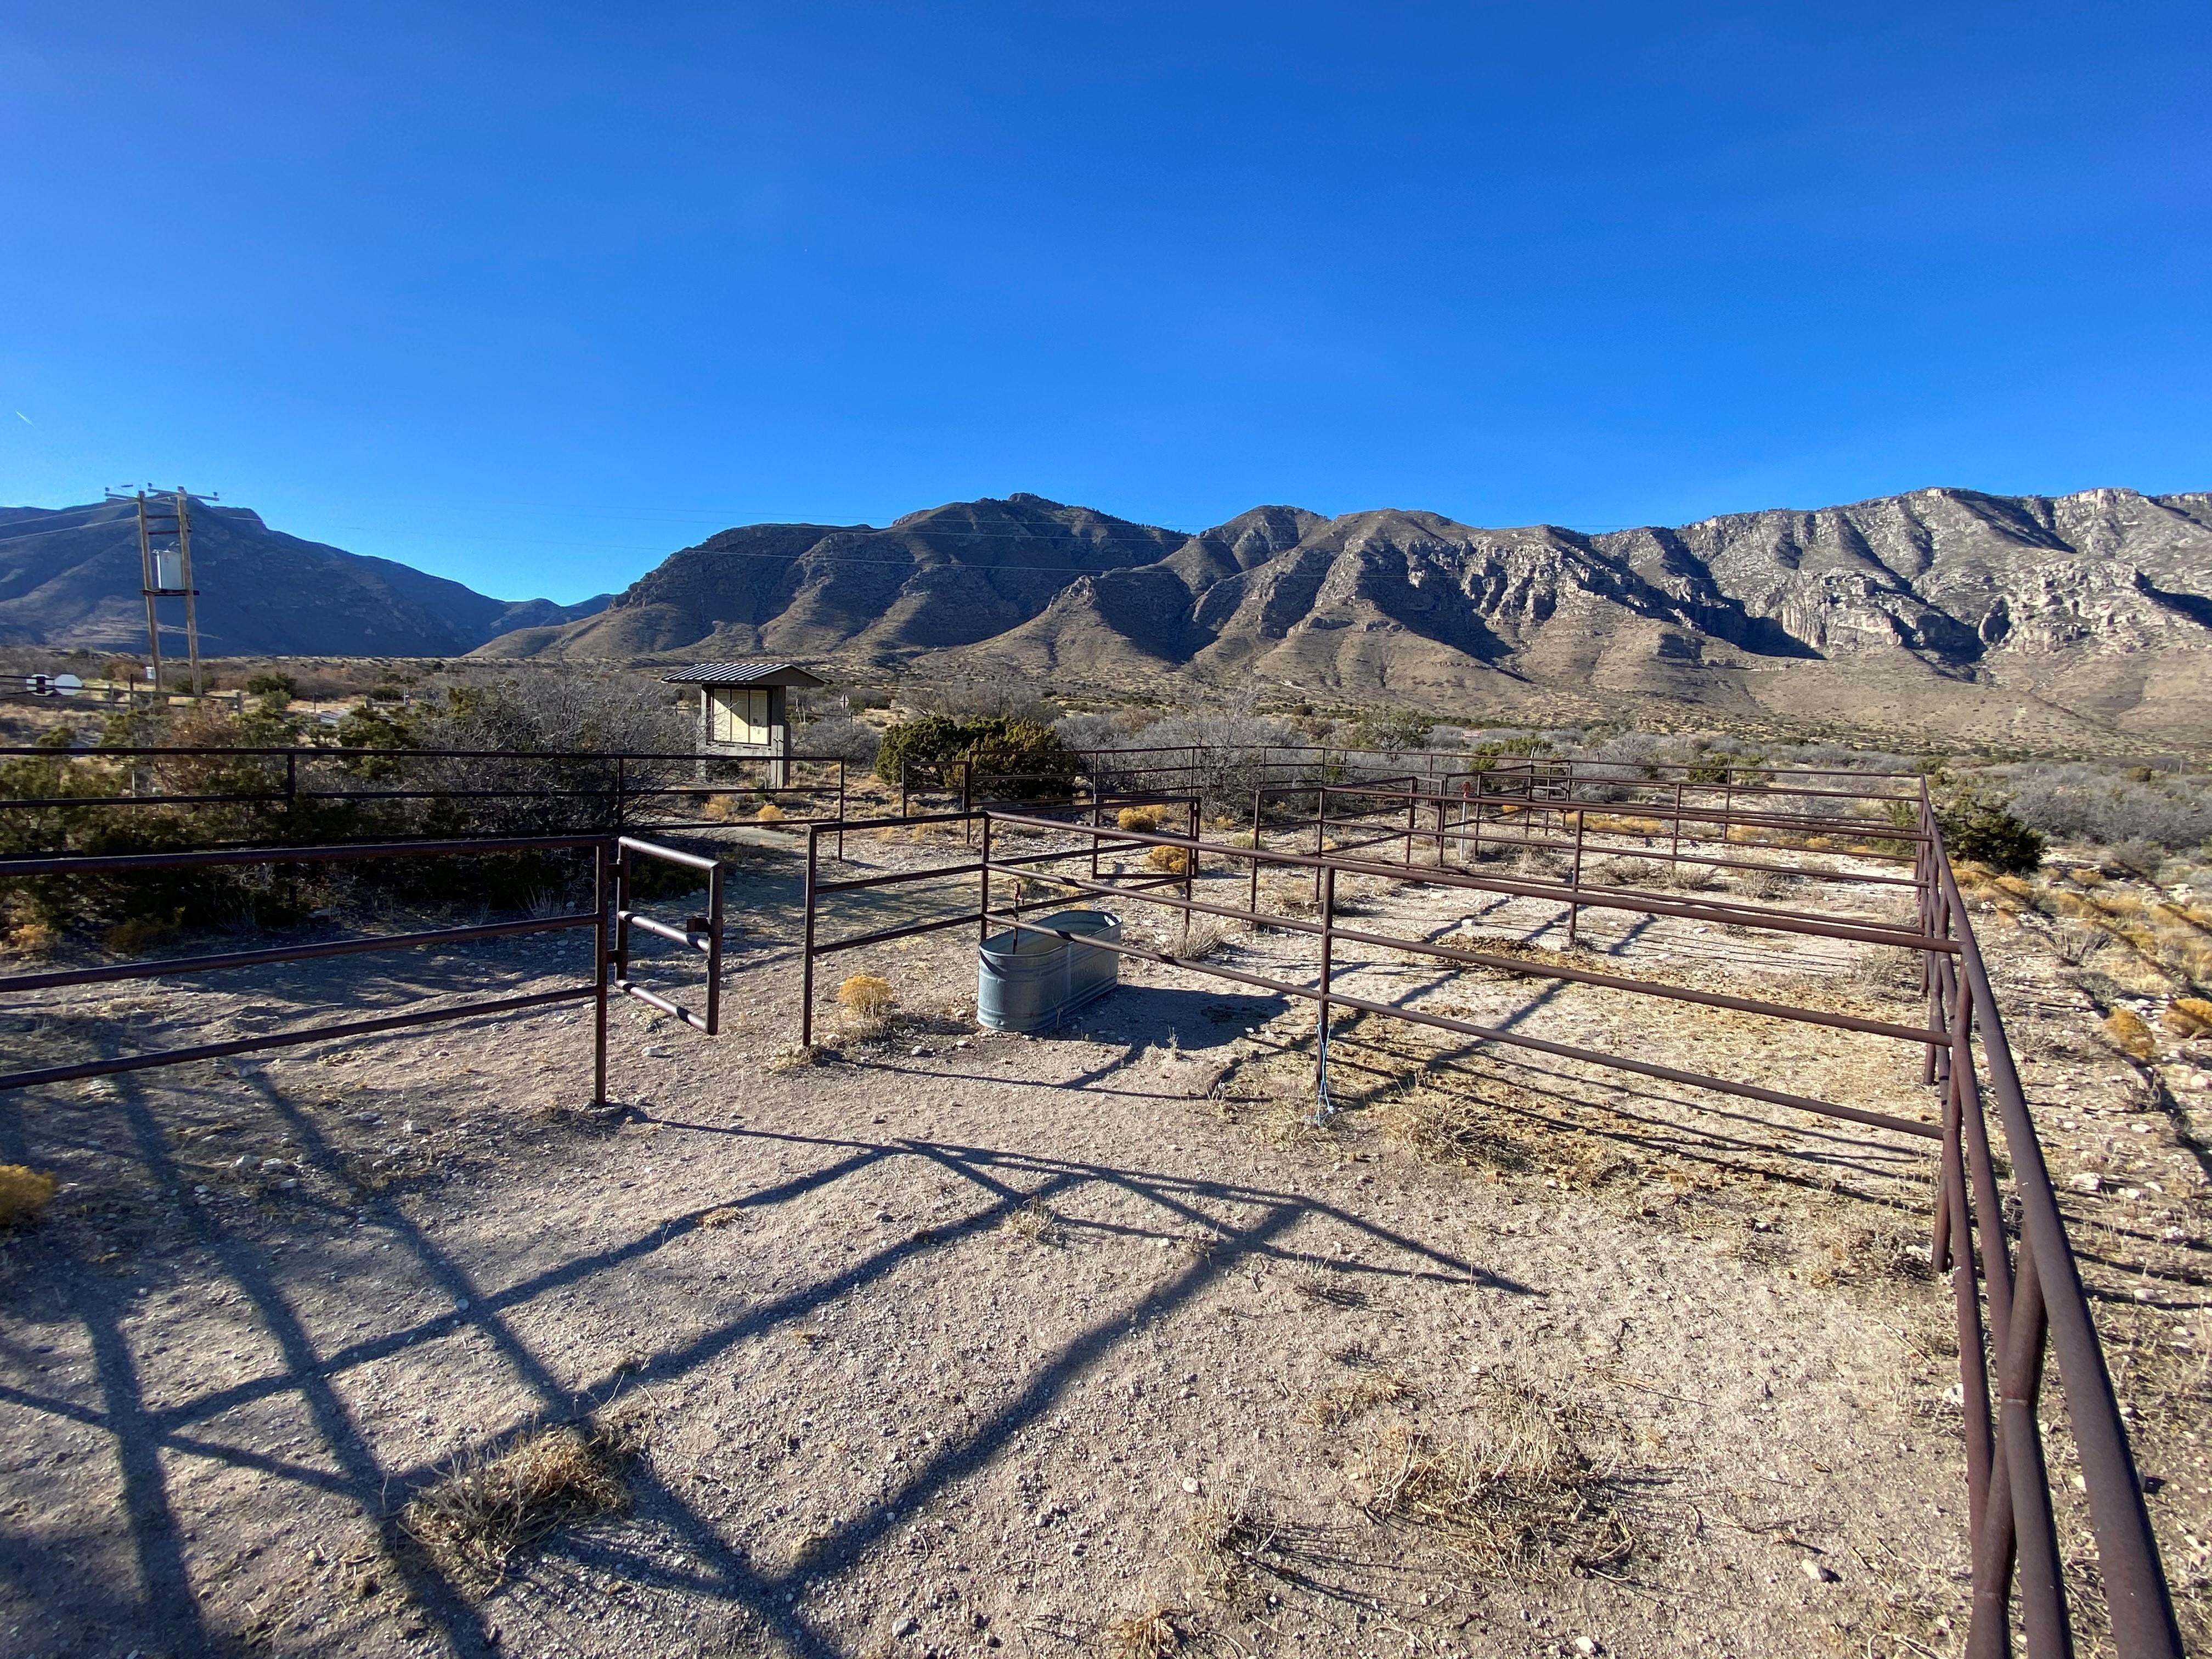 A fenced horse corral compound with desert mountains in the background